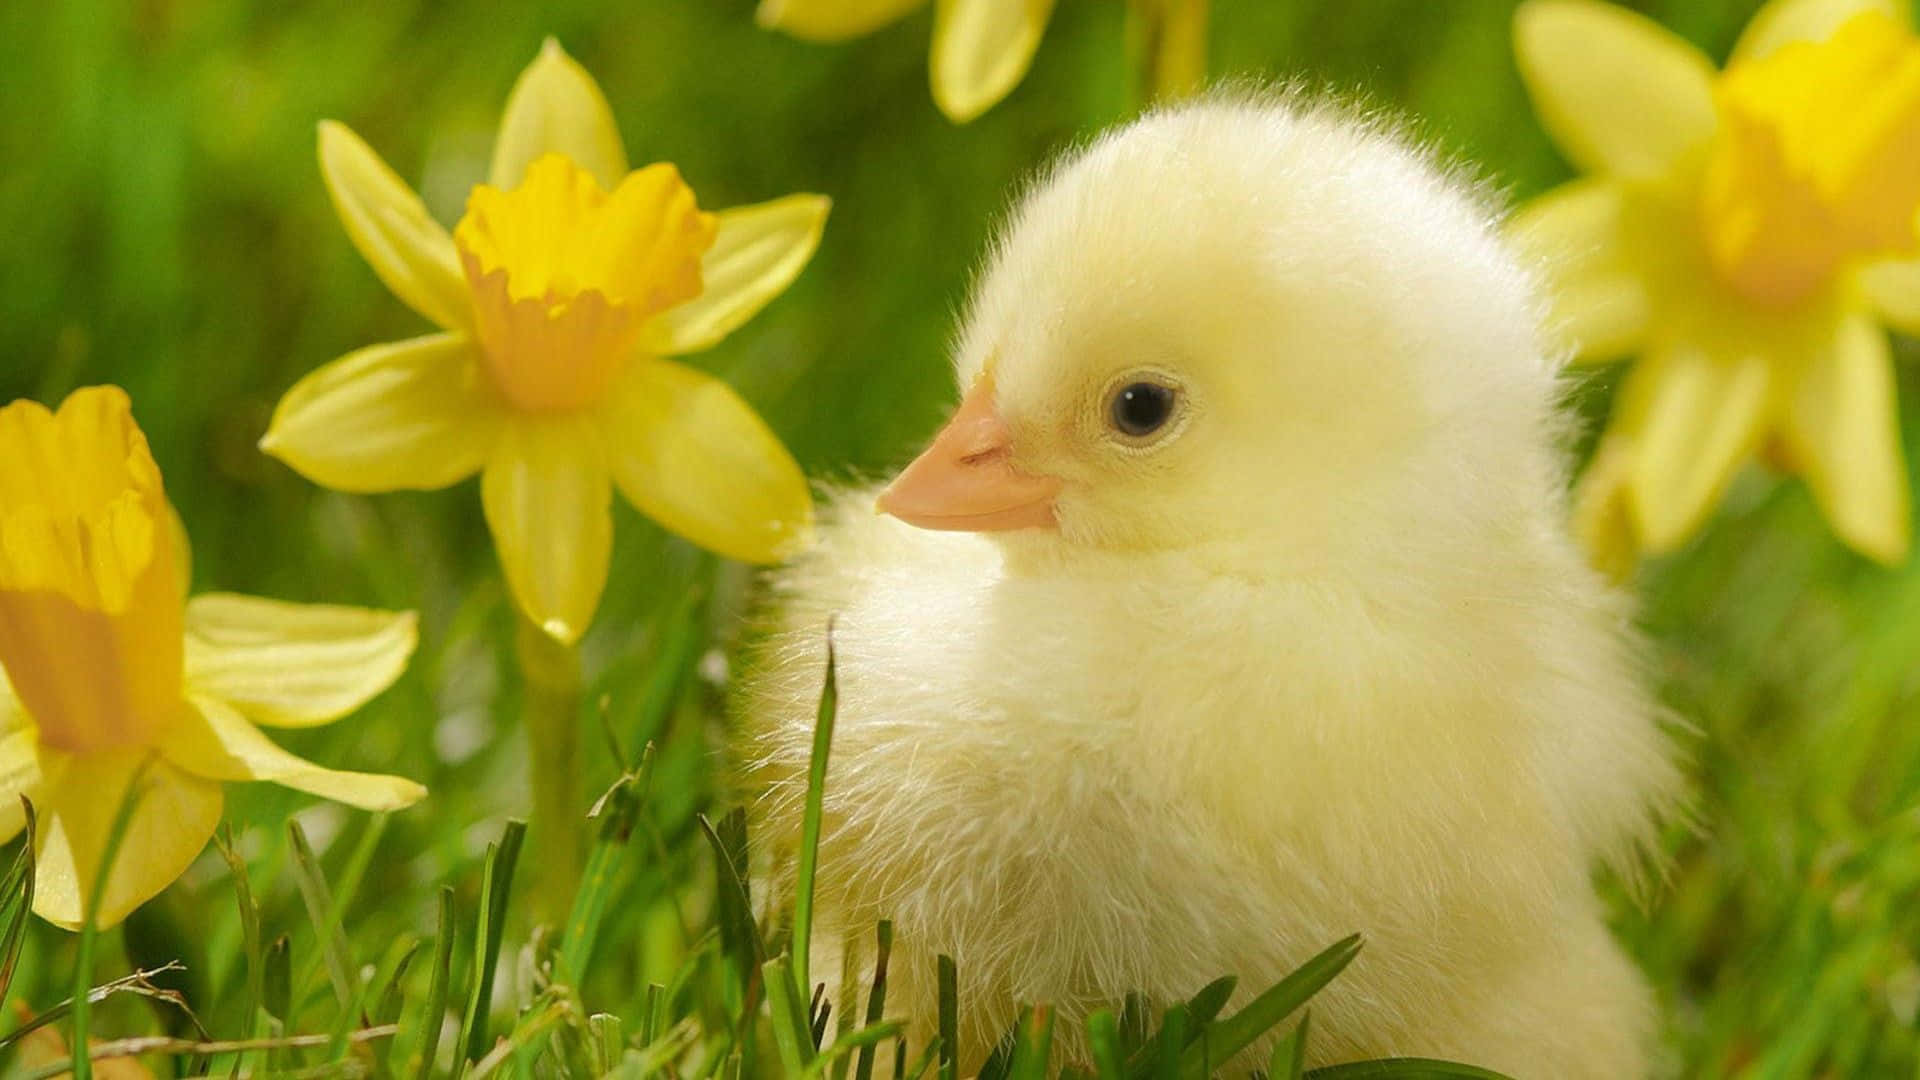 Little Cute Duck With A Yellow Flower